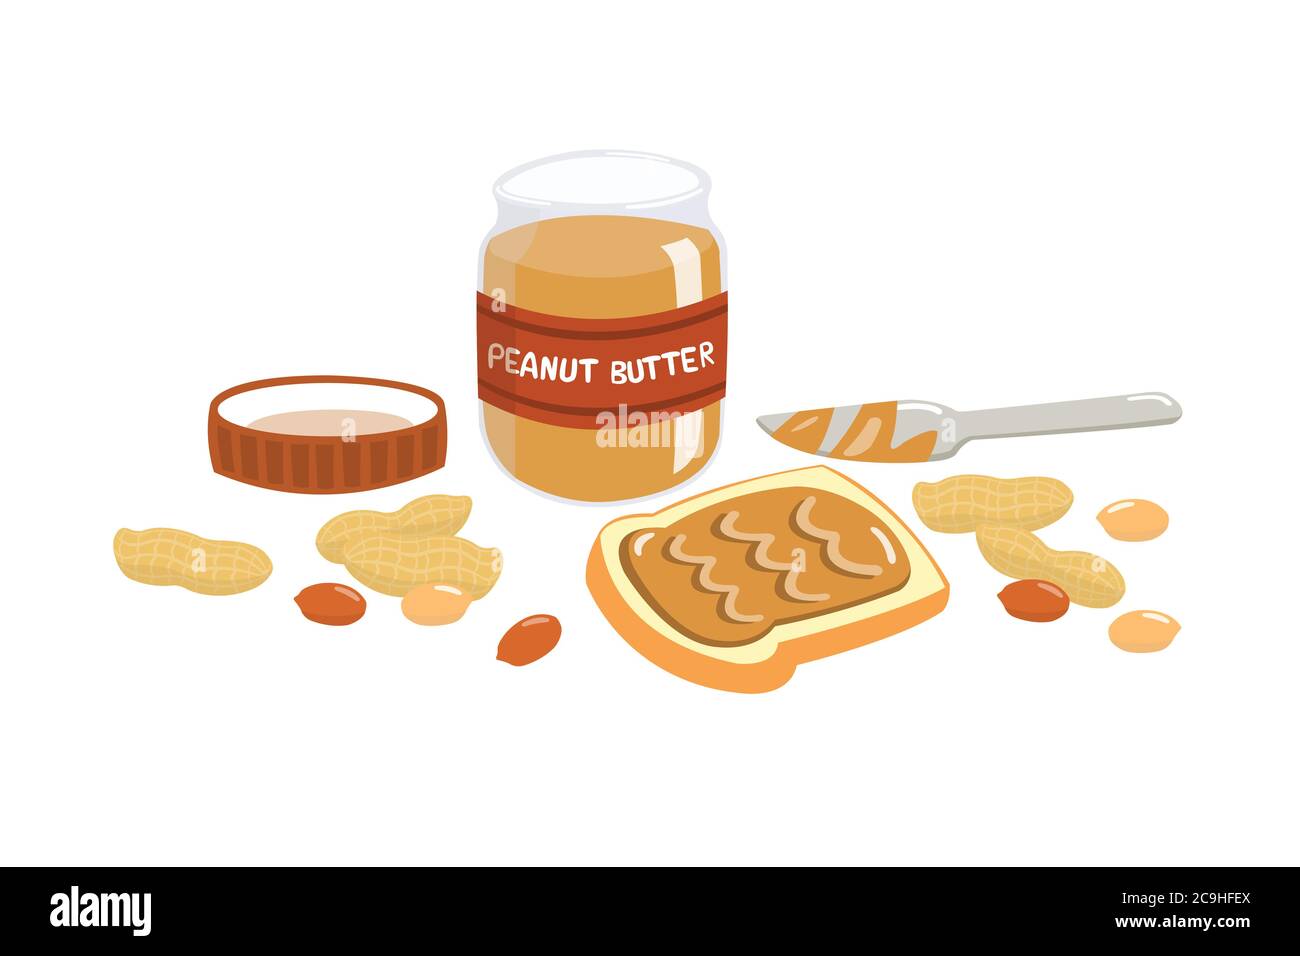 Peanut butter spread on bread with butter knife. Peanut butter, peanut nut and bread isolated on white background. Stock Vector